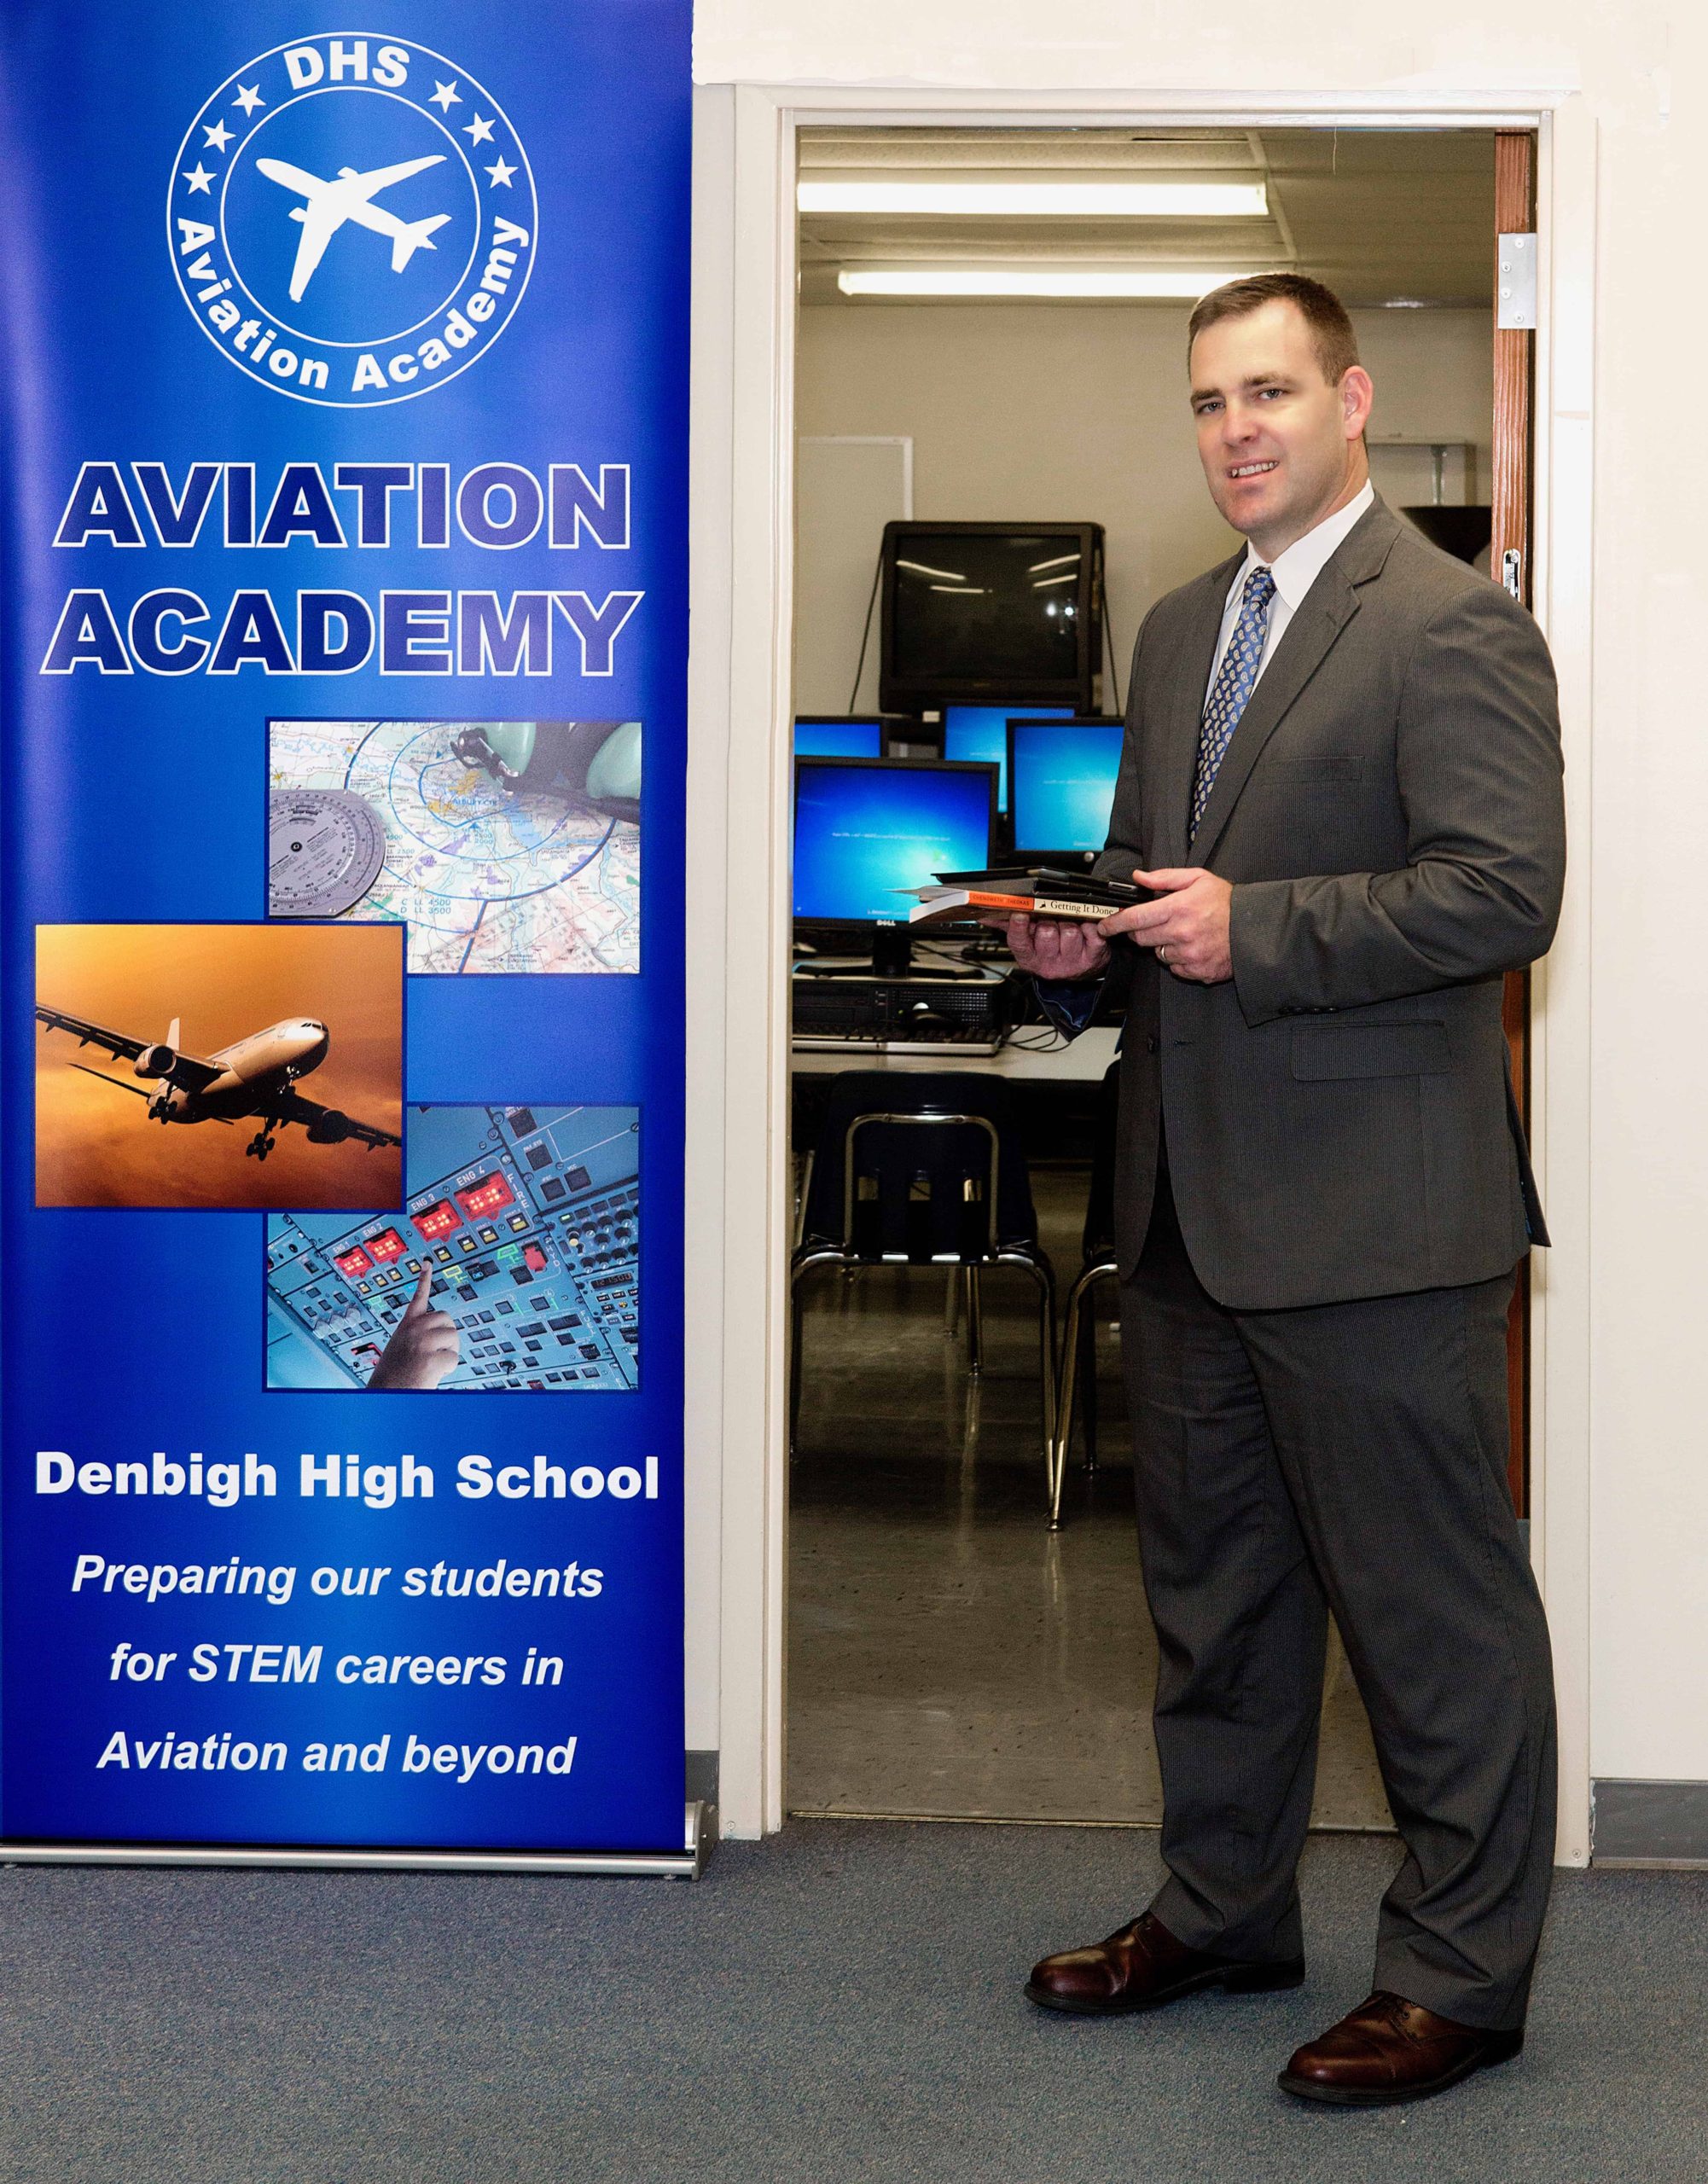 Aaron L. Smith is at Aviation Academy.